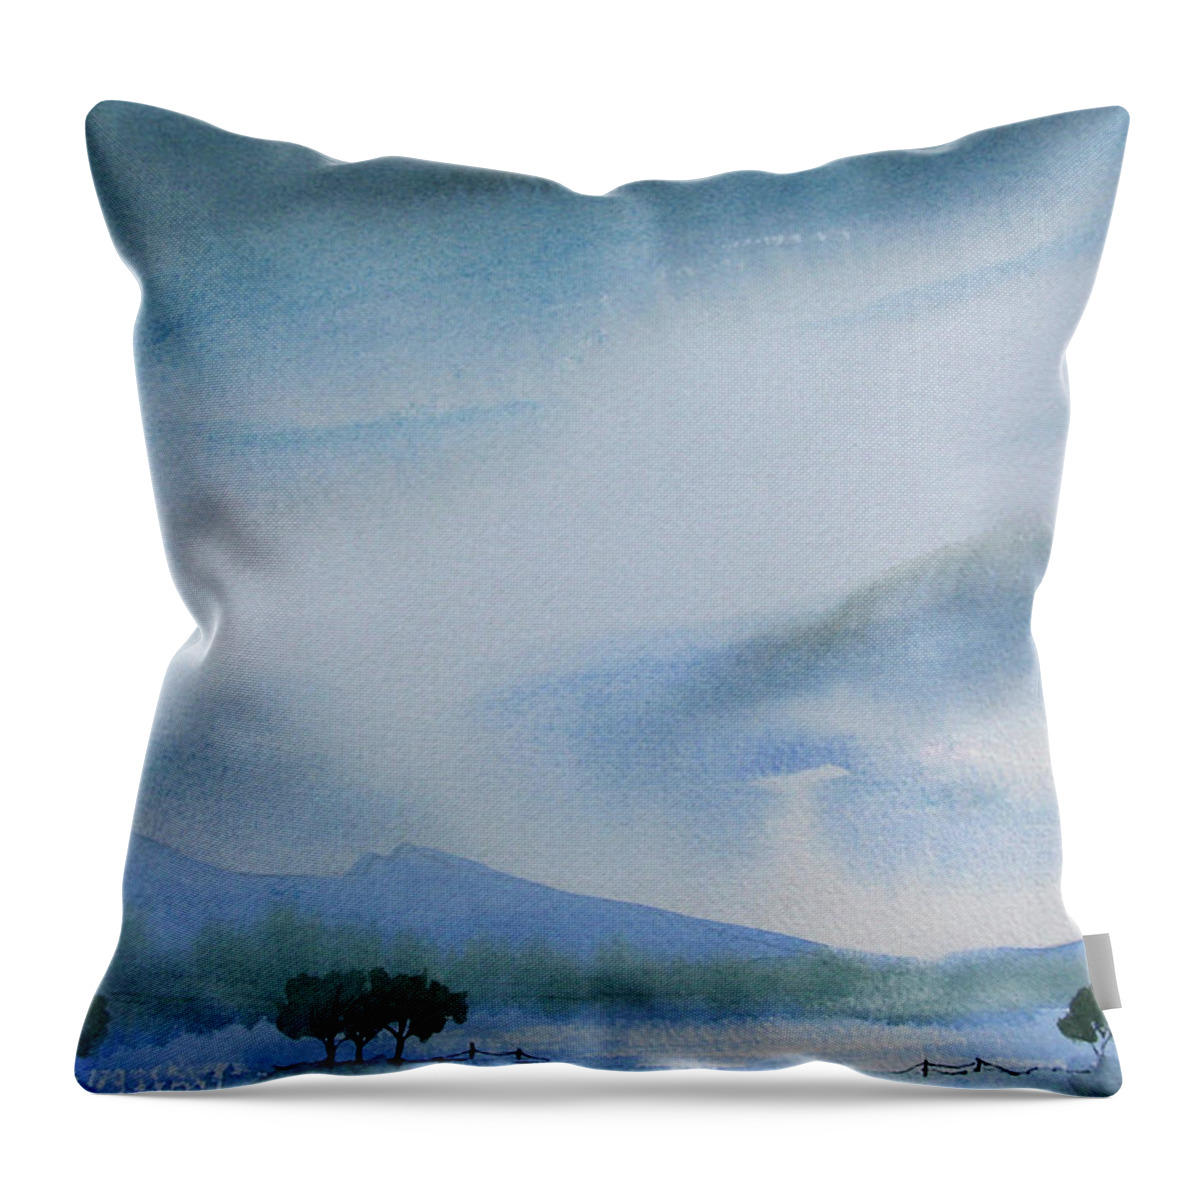 Atmospheric Mood Throw Pillow featuring the painting Watercolor Painting Of Mountains #1 by Ikon Ikon Images